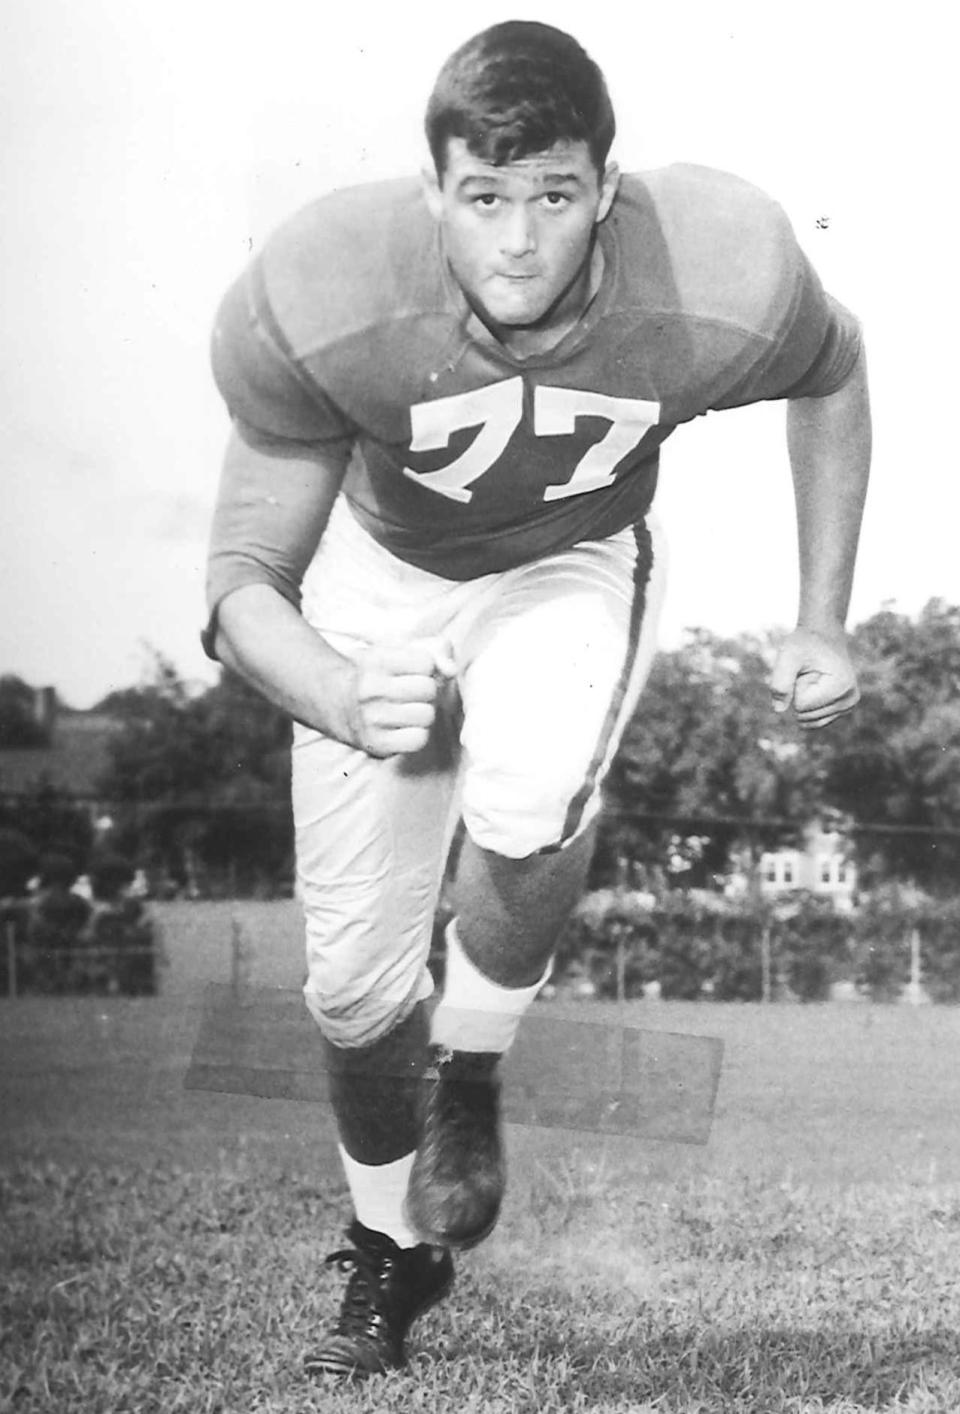 Don Leebern was a student-athlete at the University of Georgia and later served on the UGA athletic board and was a longtime Board of Regents appointee.